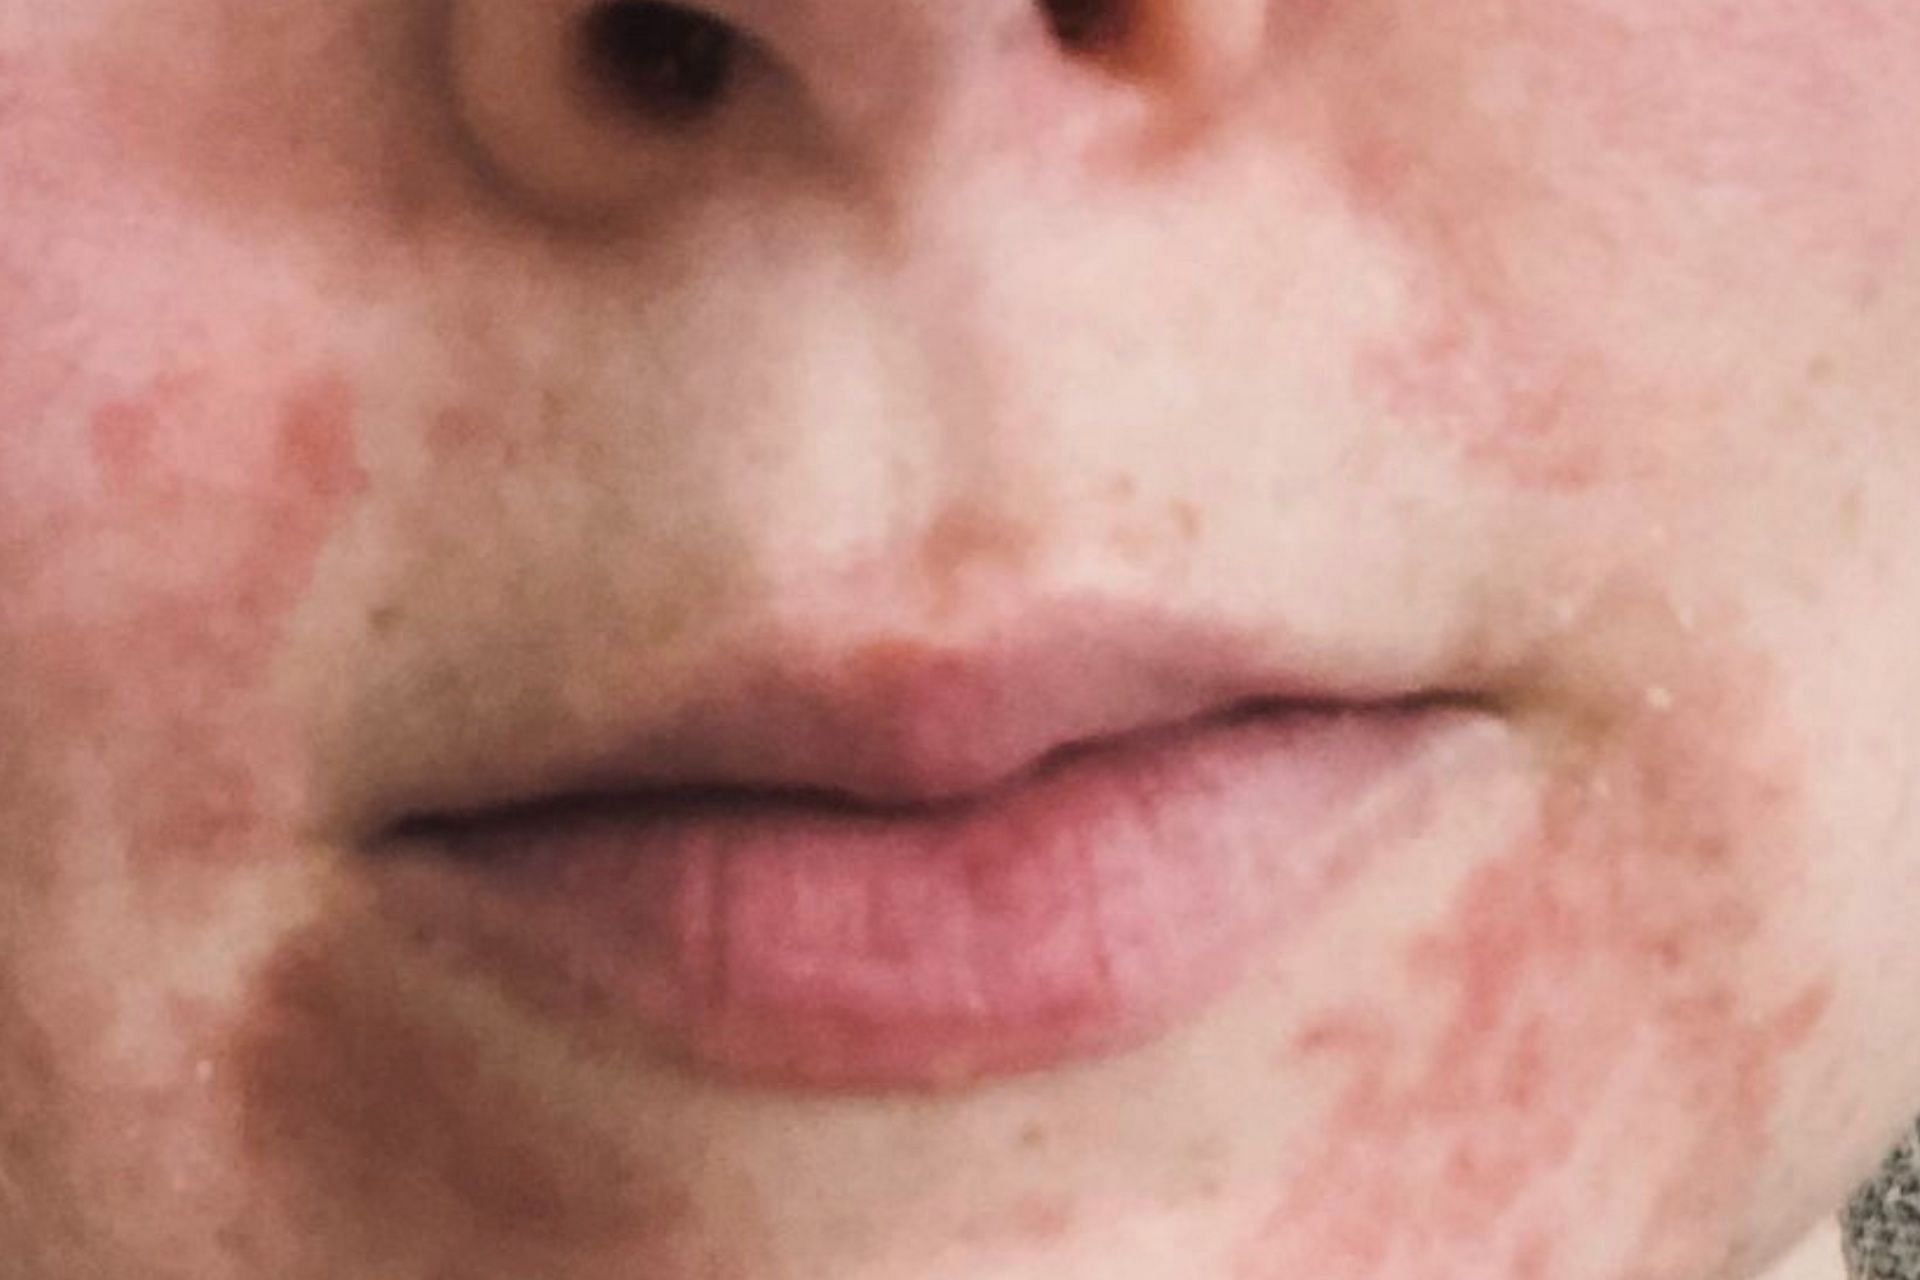 The condition appears around the mouth. (Photo via Instagram/amandascuteface)